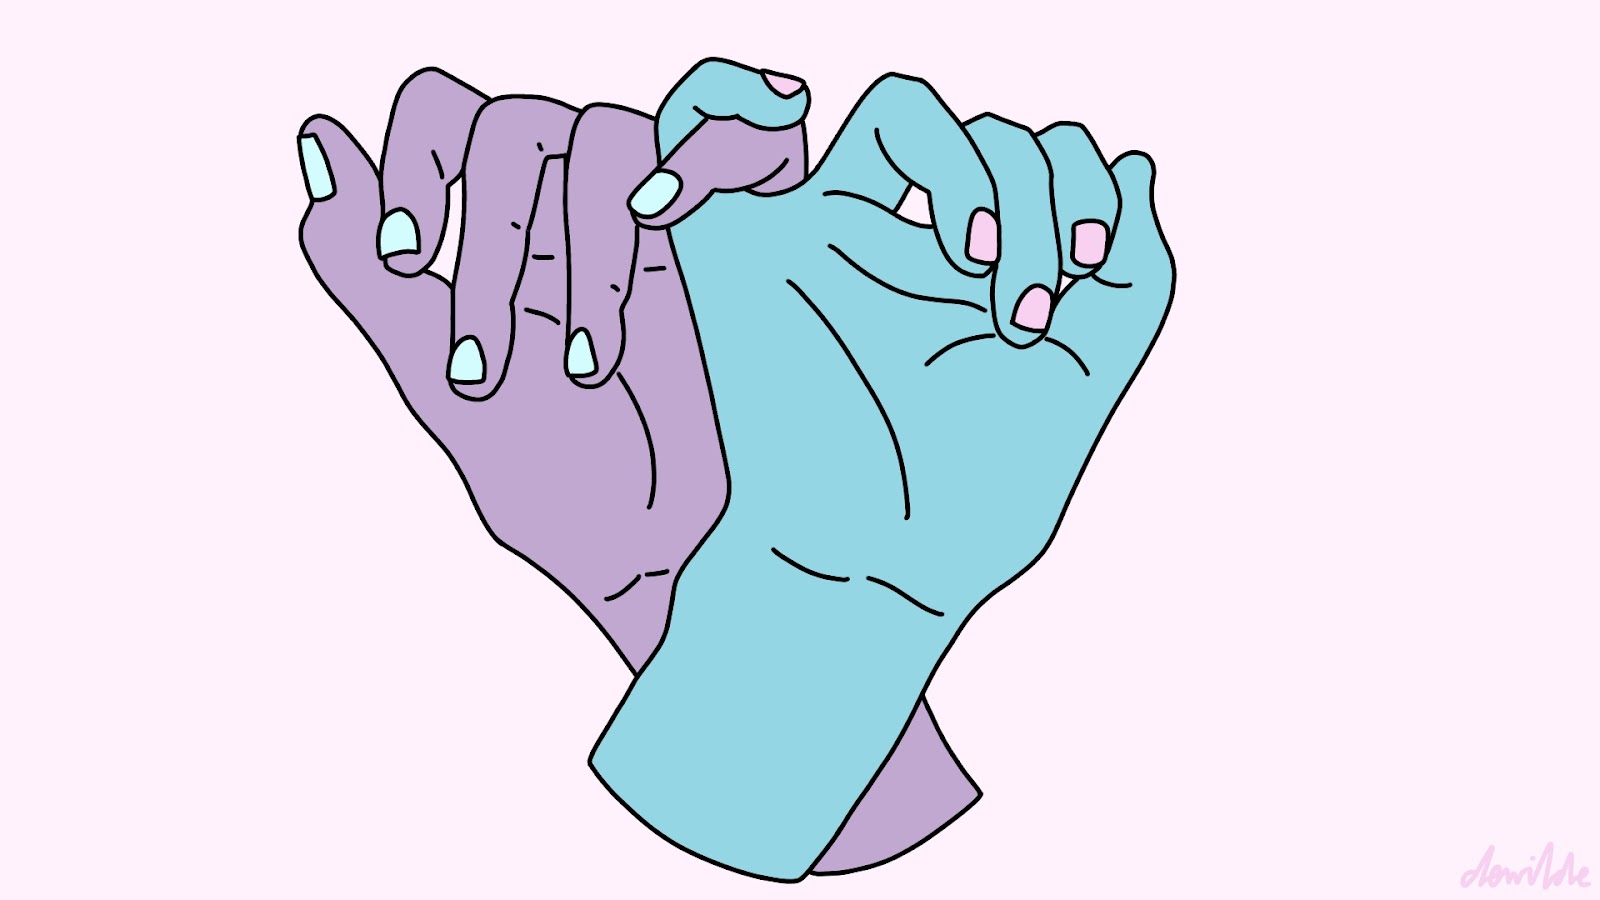 Illustration by Darcy Rae of two hands interlocking